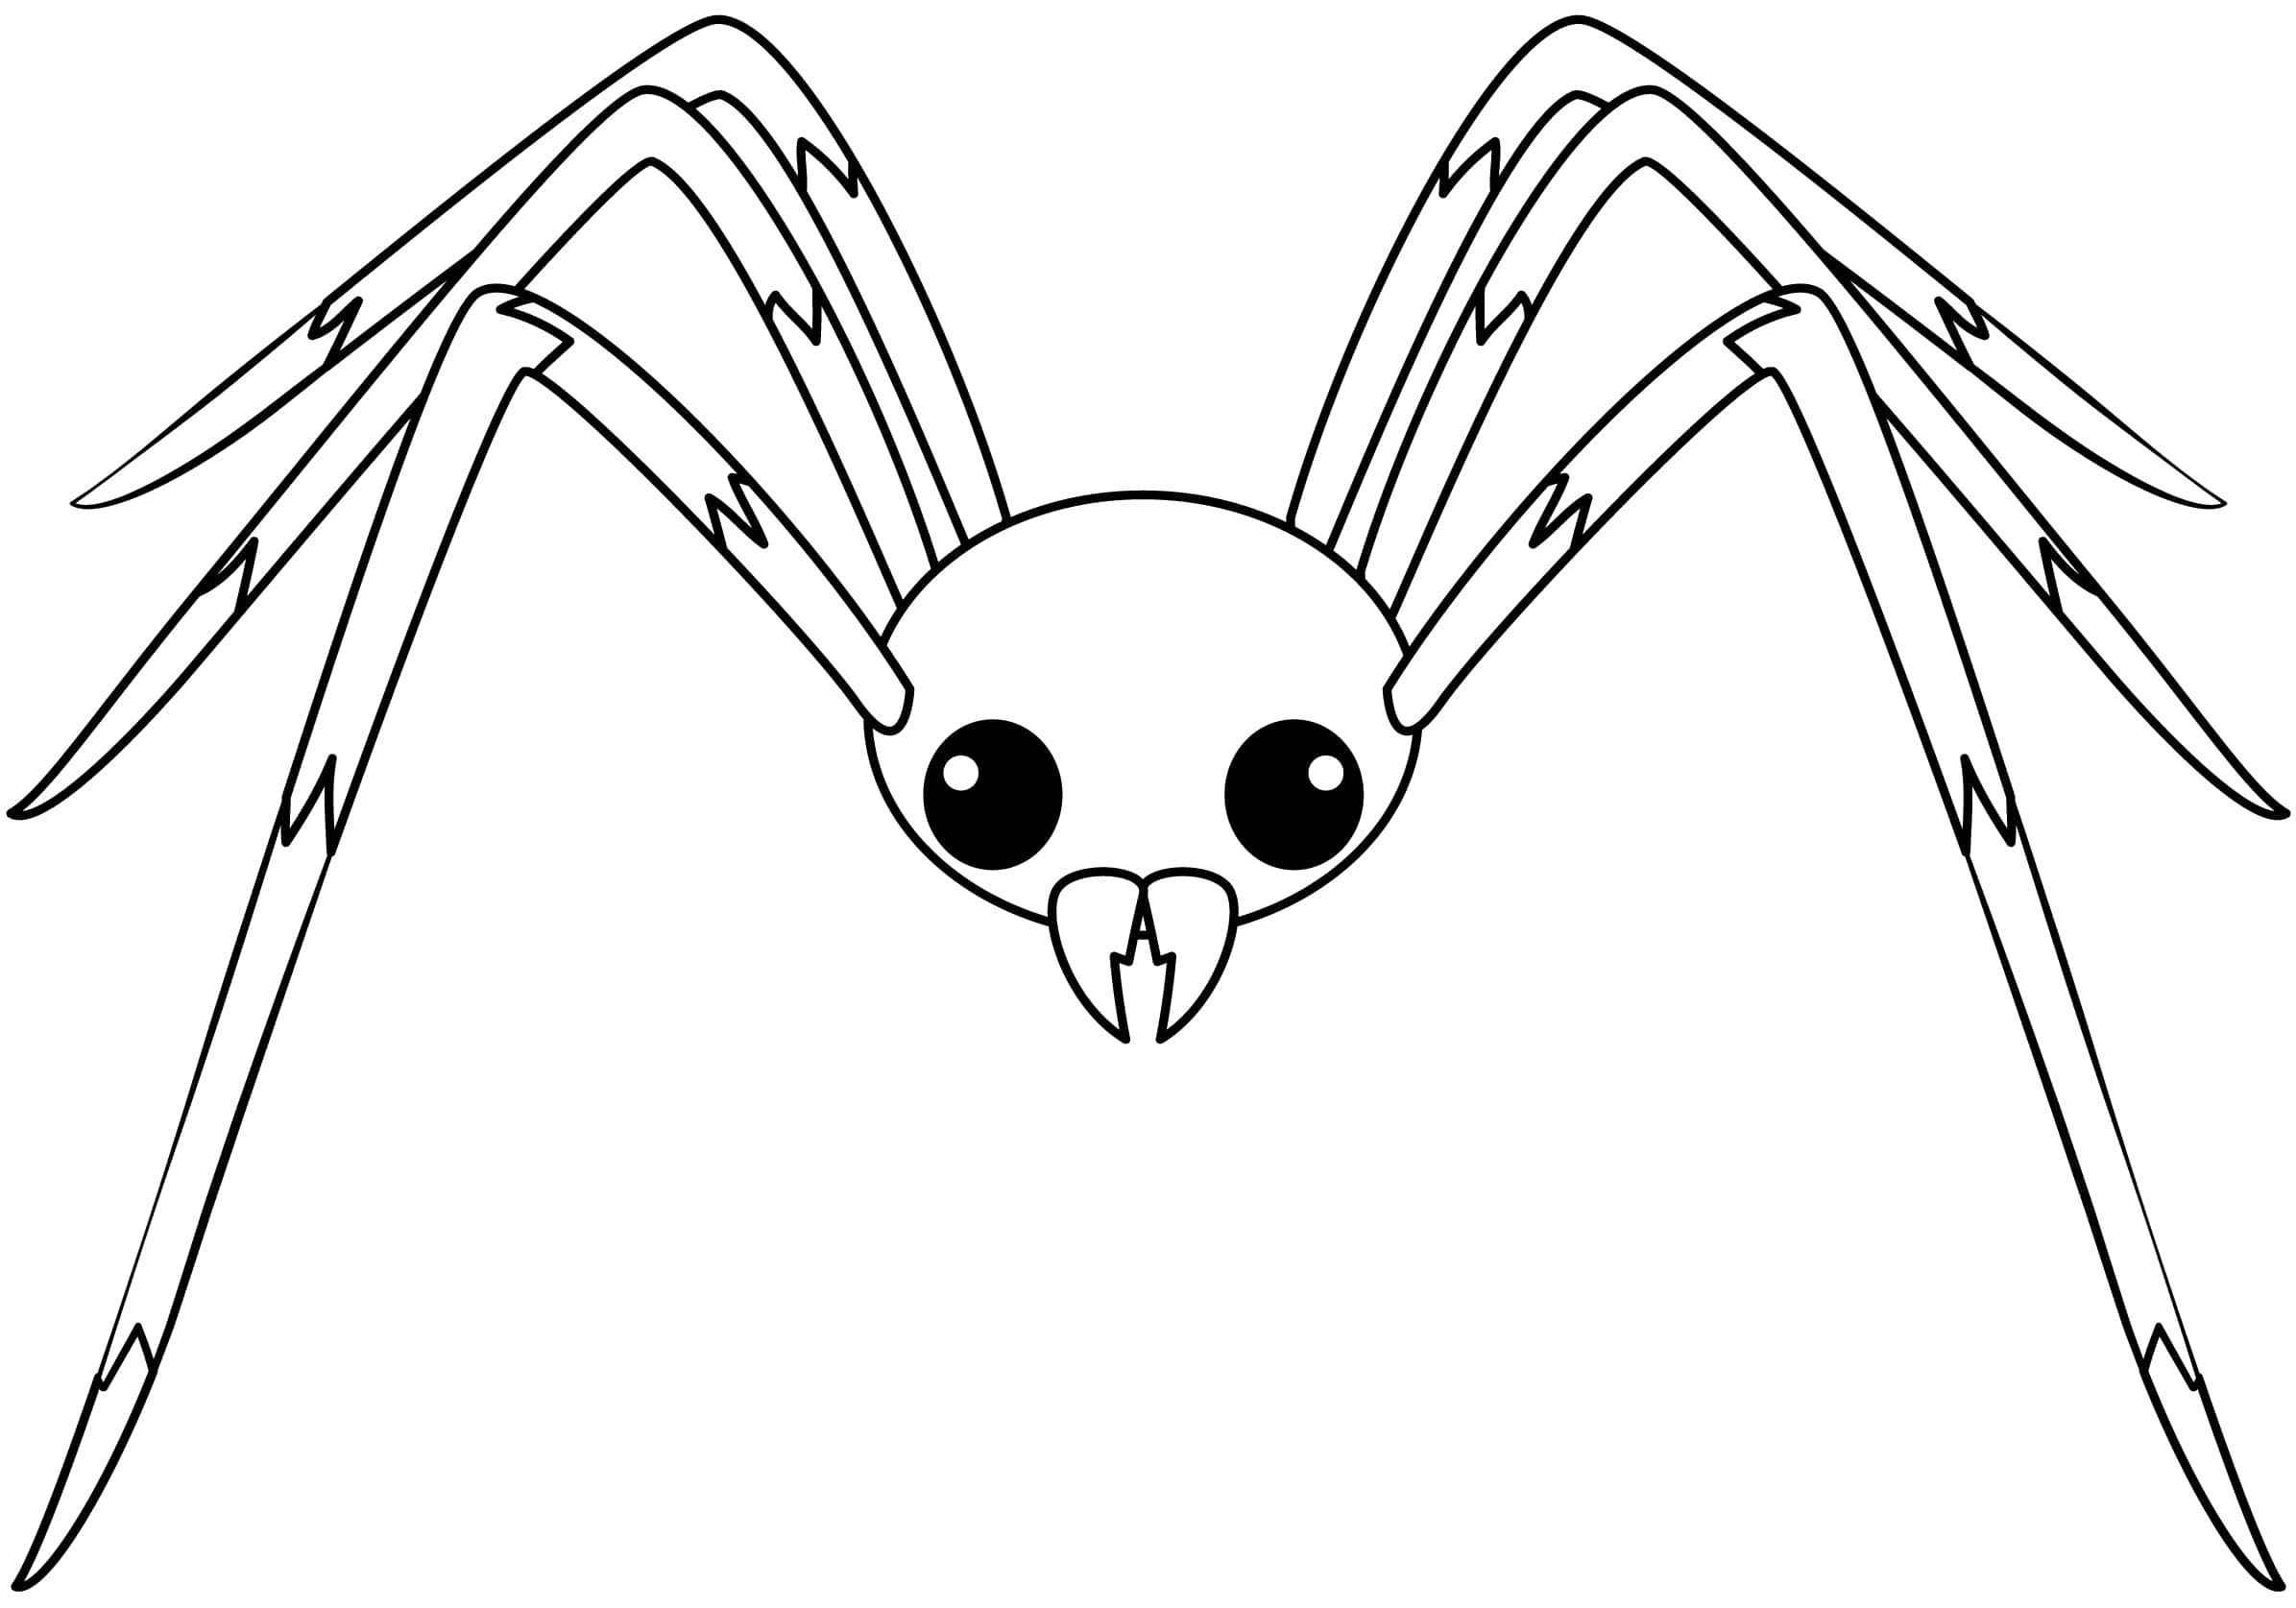 Printable Spider Template_21877